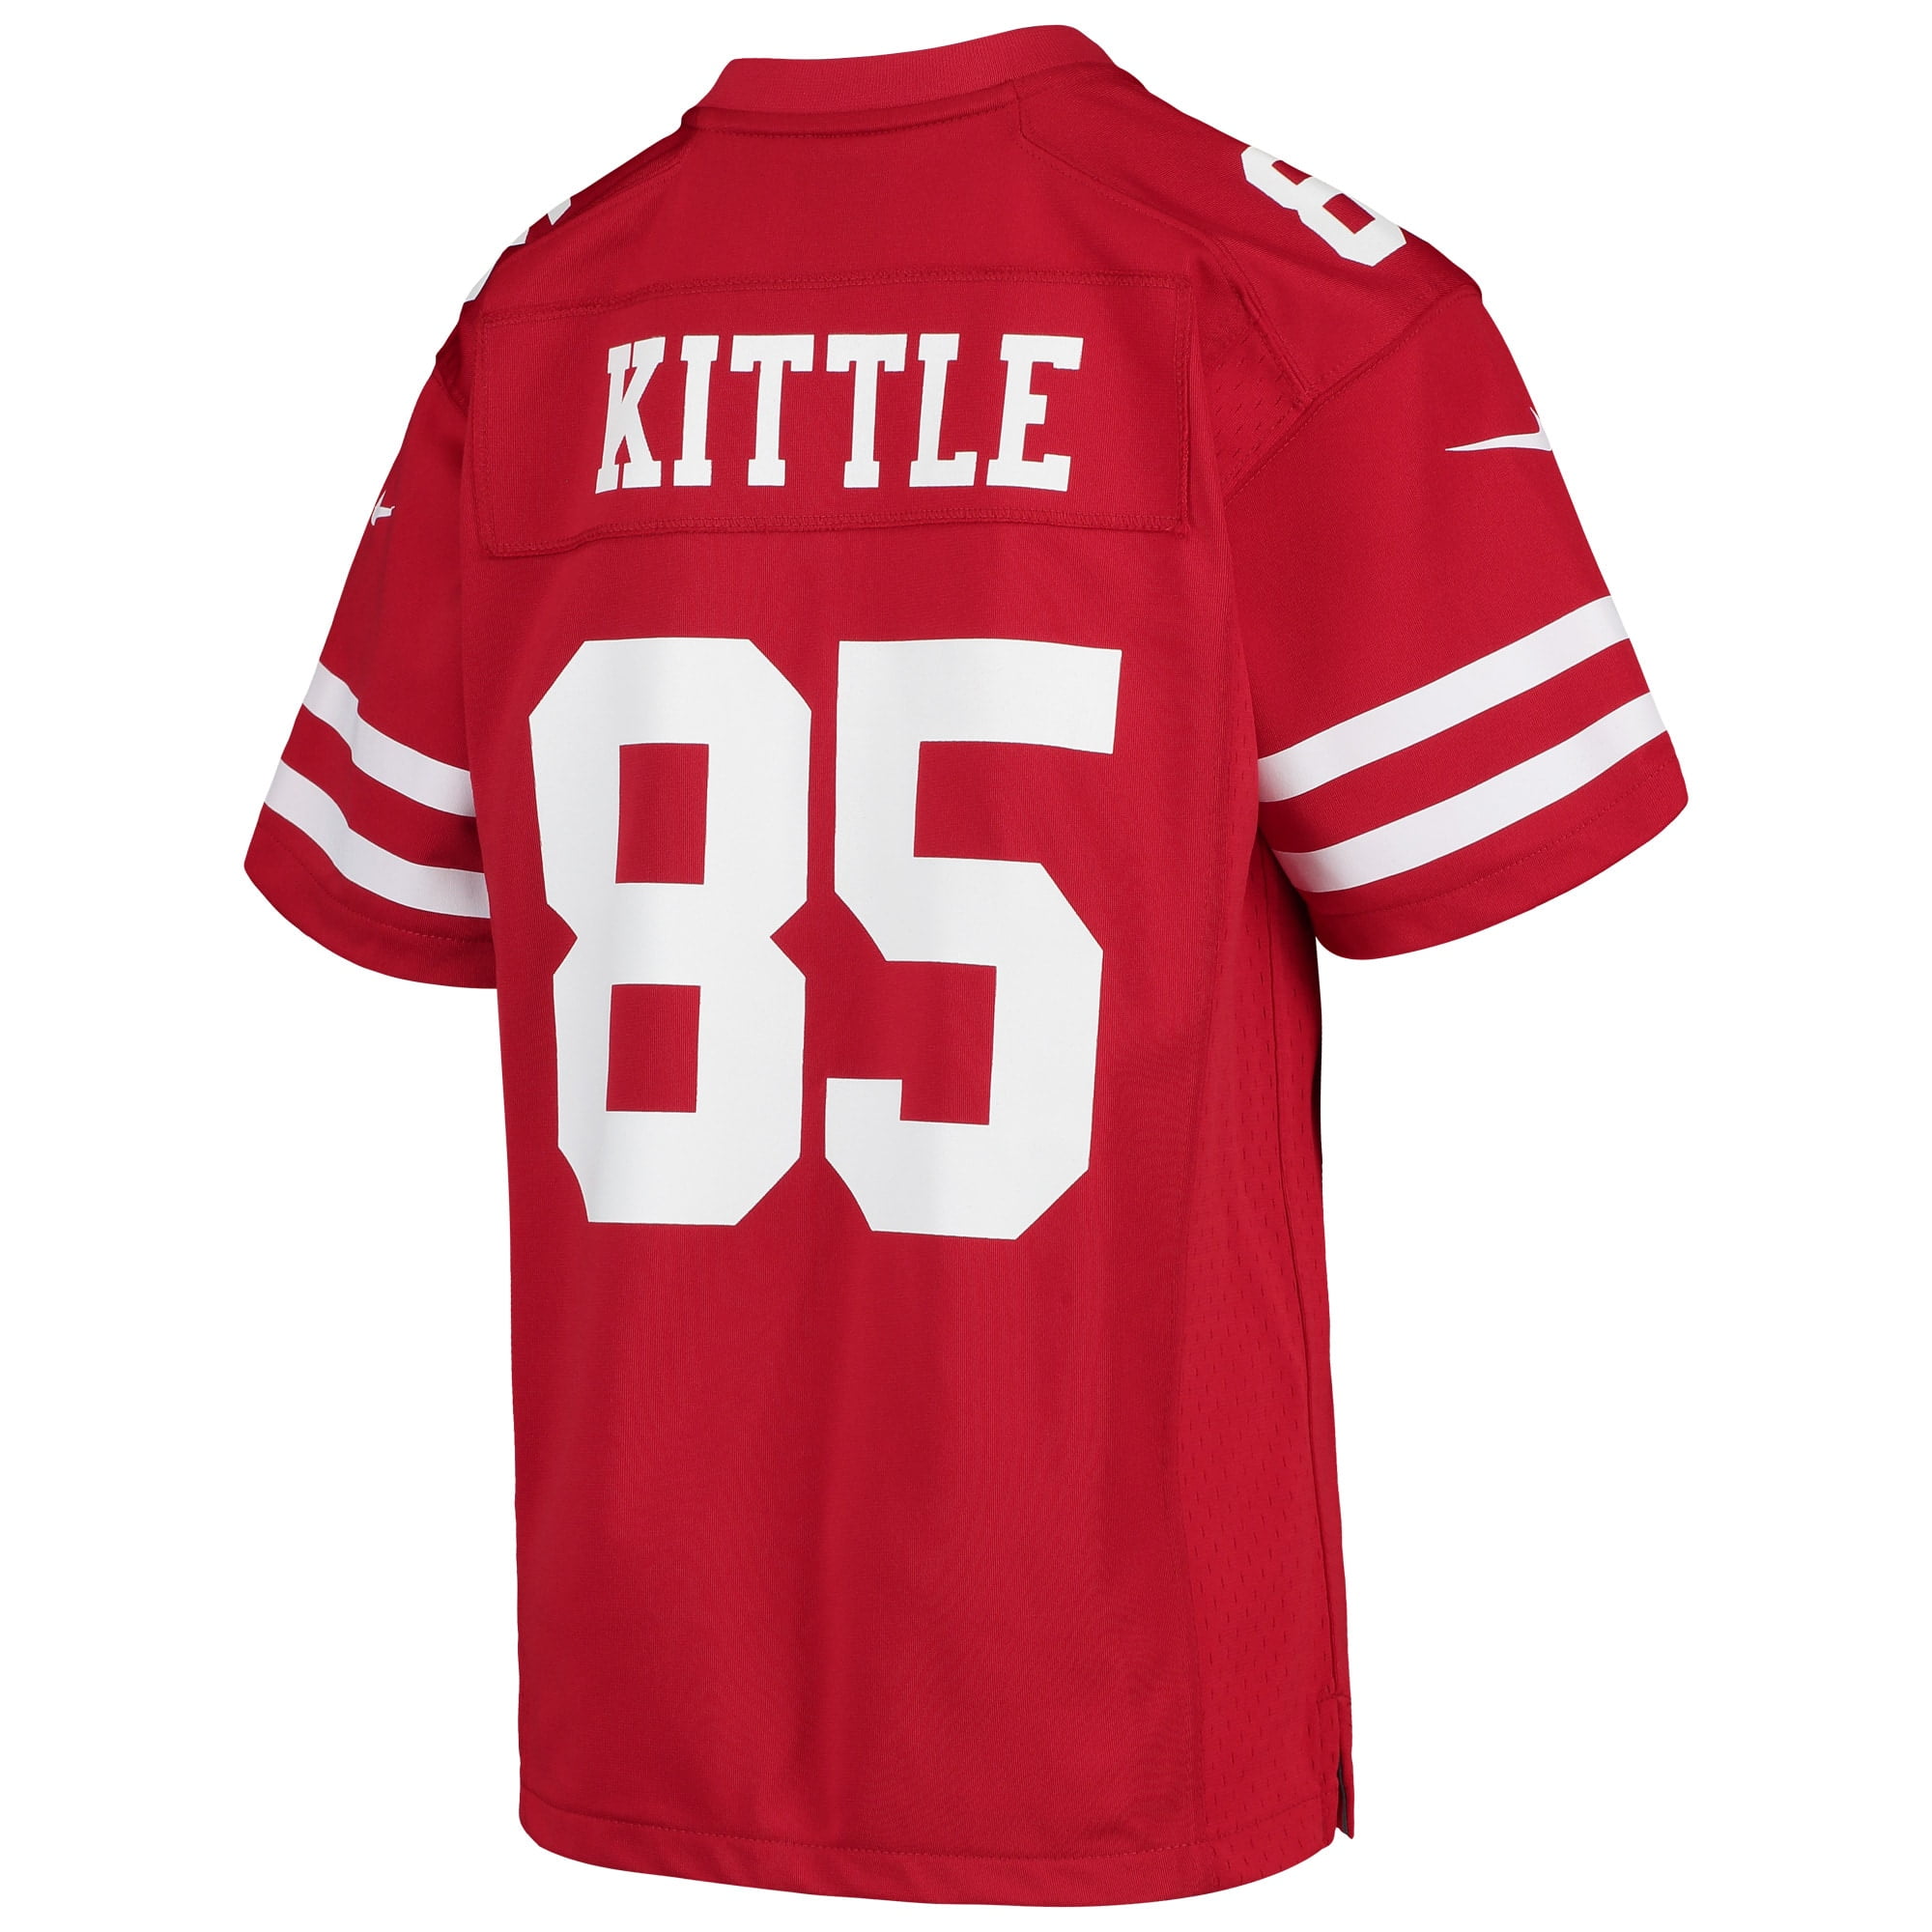 5t 49ers jersey Online shopping has 